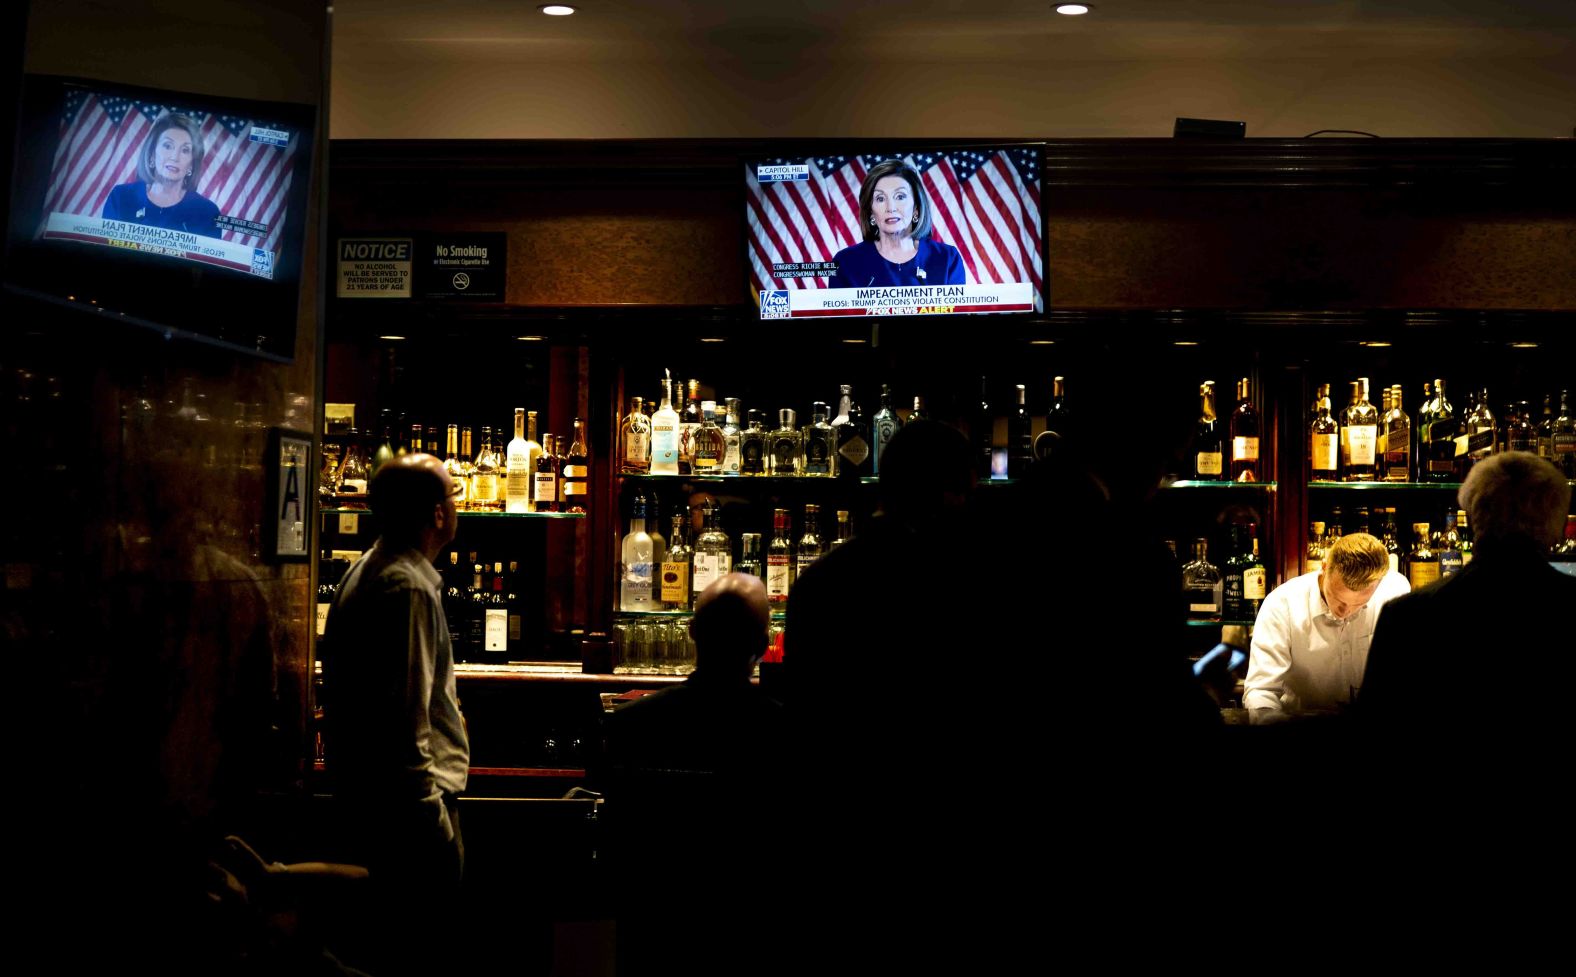 Two men inside New York's Trump Tower watch Pelosi on television on September 24. "Today, I am announcing the House of Representatives moving forward with an official impeachment inquiry," Pelosi said <a href="https://www.cnn.com/2019/09/24/politics/democrats-impeachment-strategy/index.html" target="_blank">in a brief speech in the Capitol,</a> adding, "The President must be held accountable. No one is above the law."